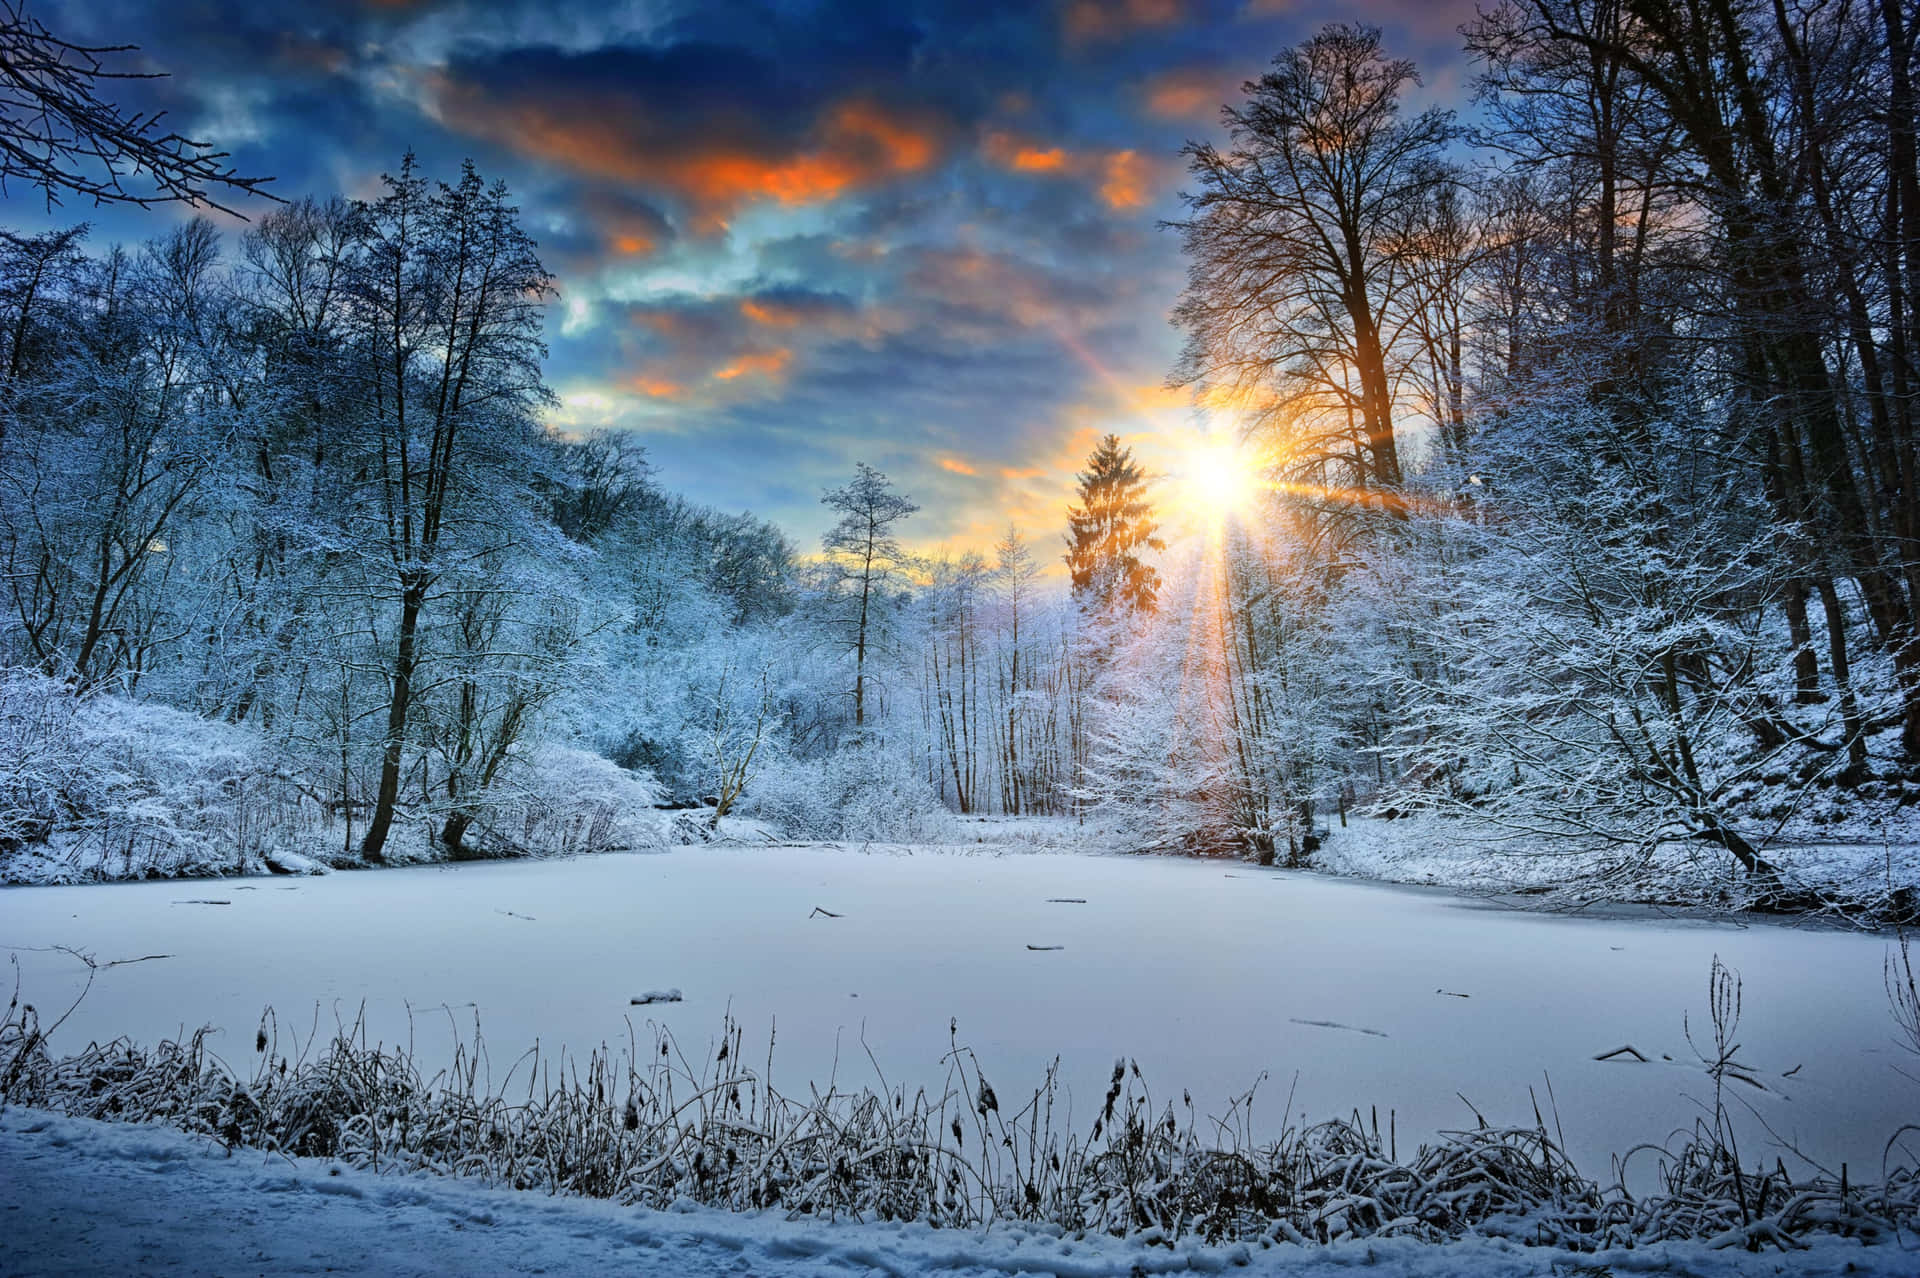 "Enjoying a Winter Day in the Outdoors" Wallpaper